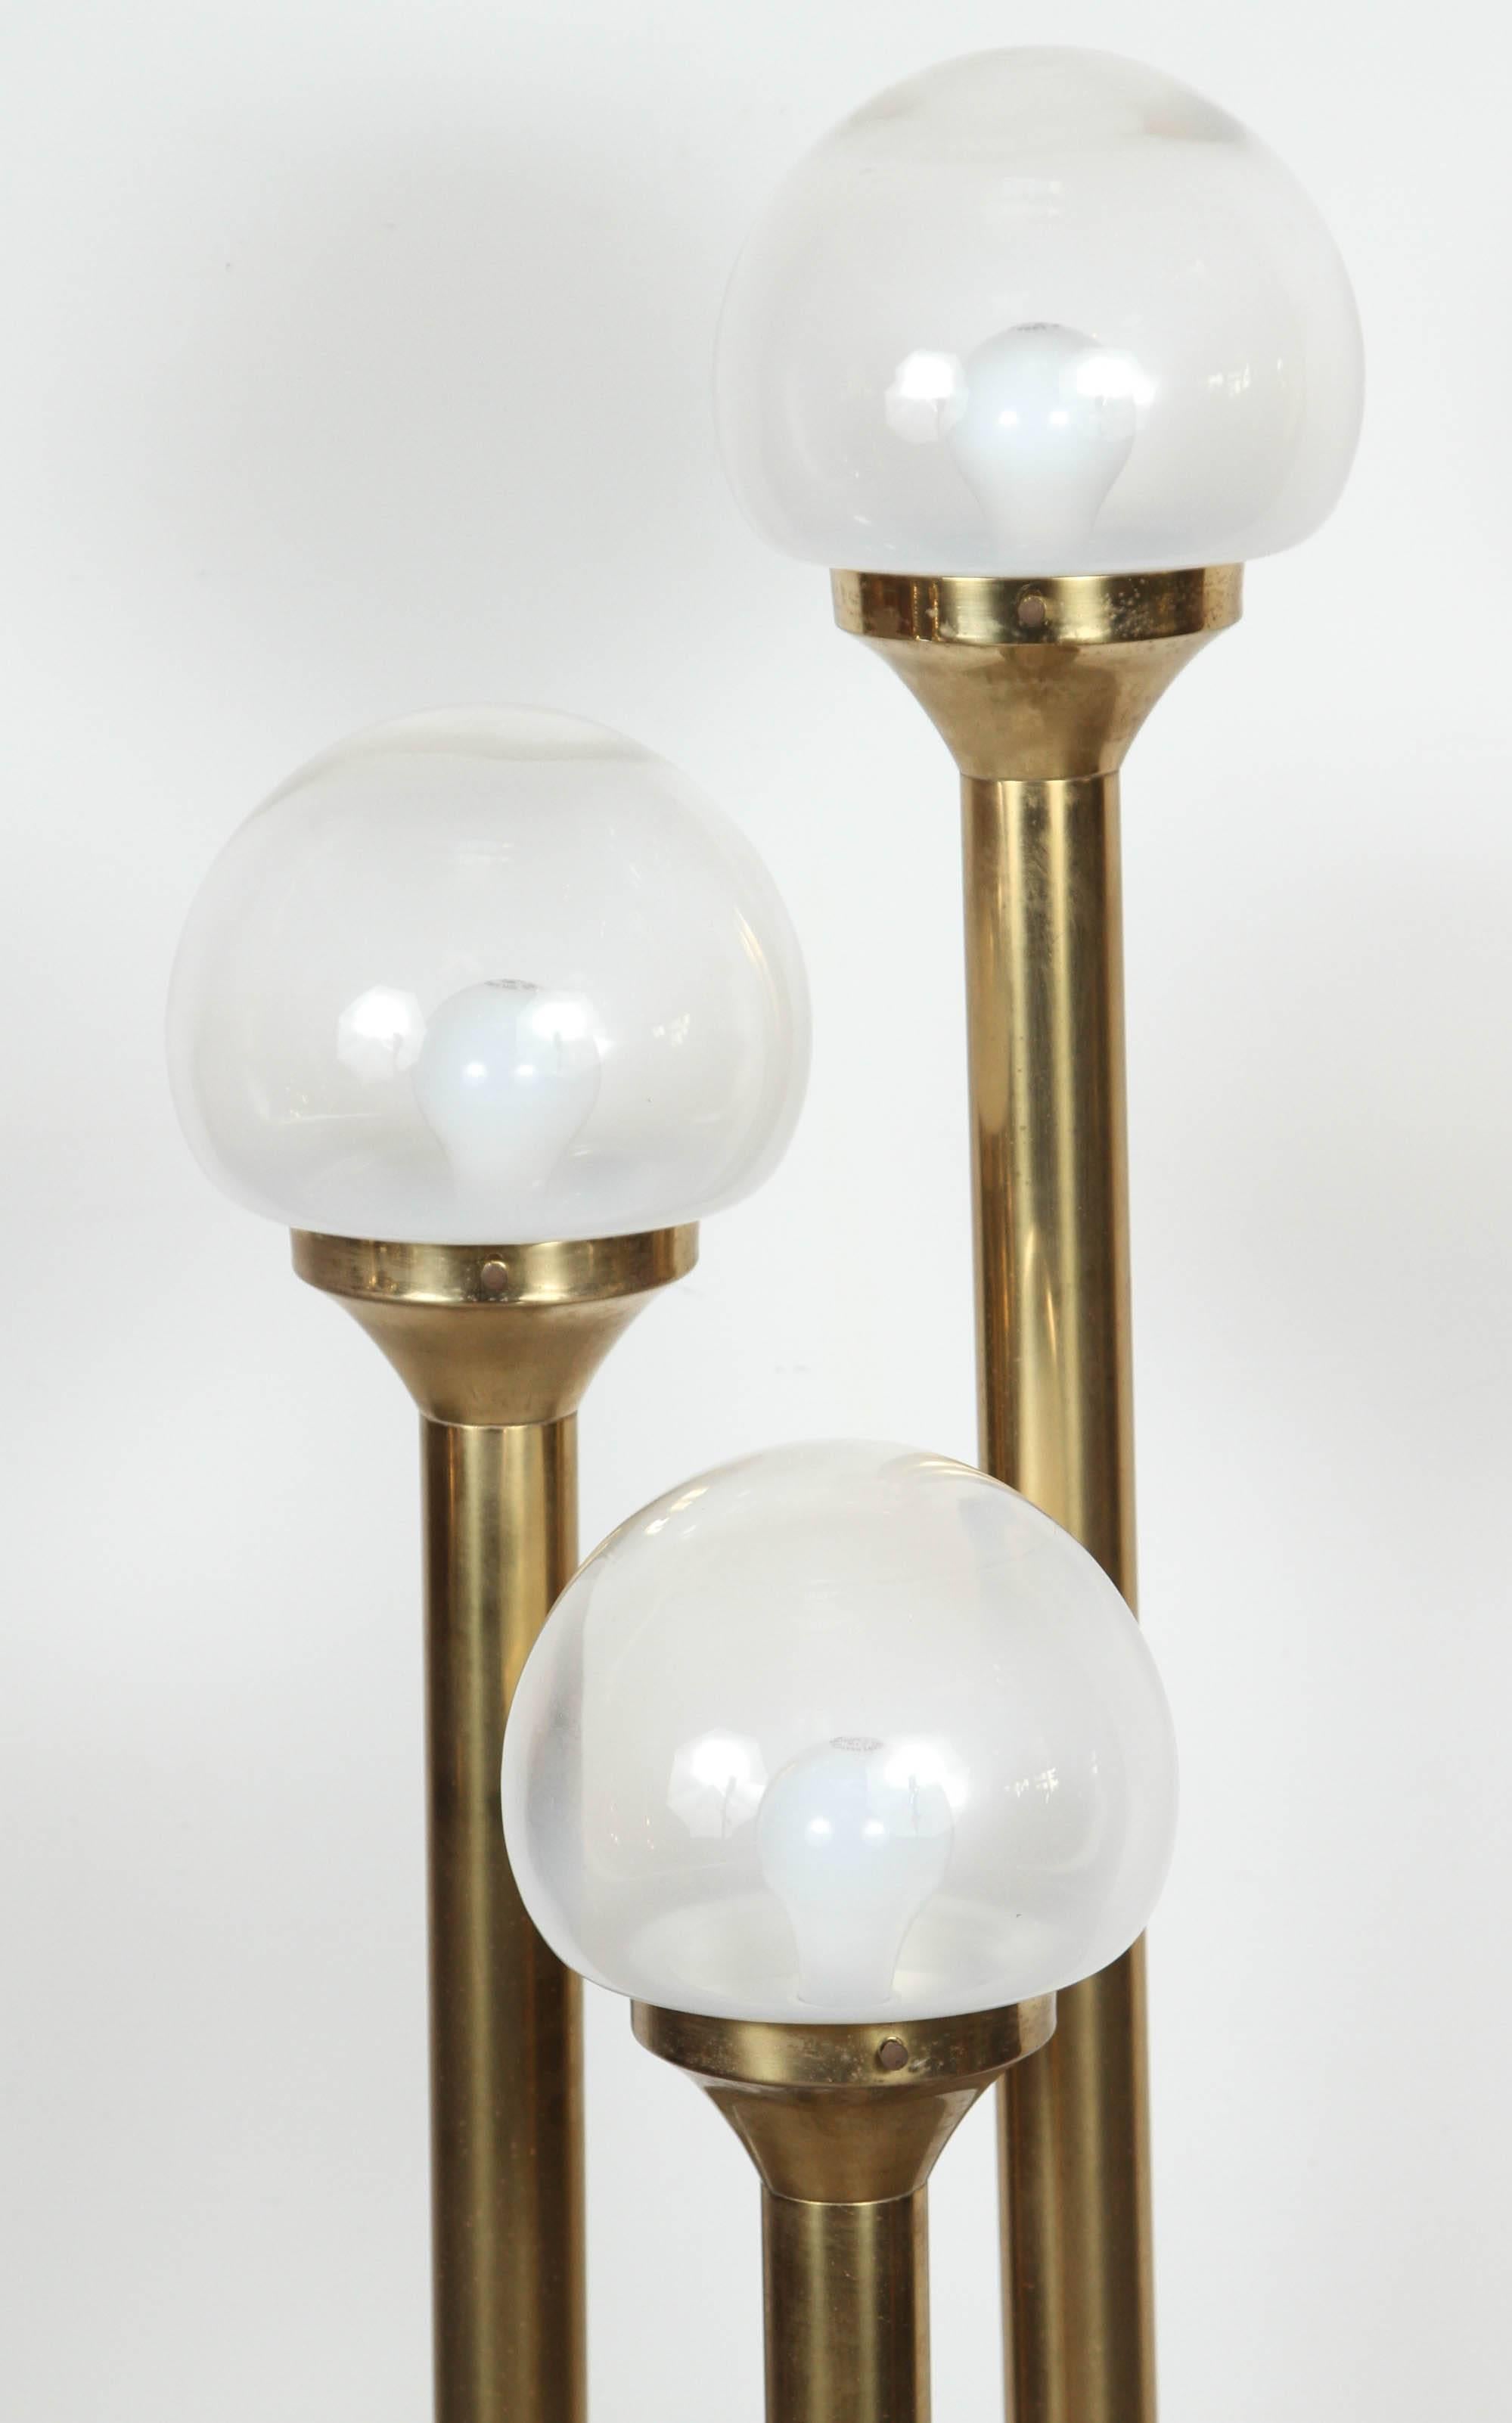 Mid-Century Modern, vintage Italian brass floor lamp with three tubular supports, each holding a handblown Murano-glass globe that is solid white at base graduating to clear at the top. 
Overall dimensions including globes 11.5" W x 11.5"